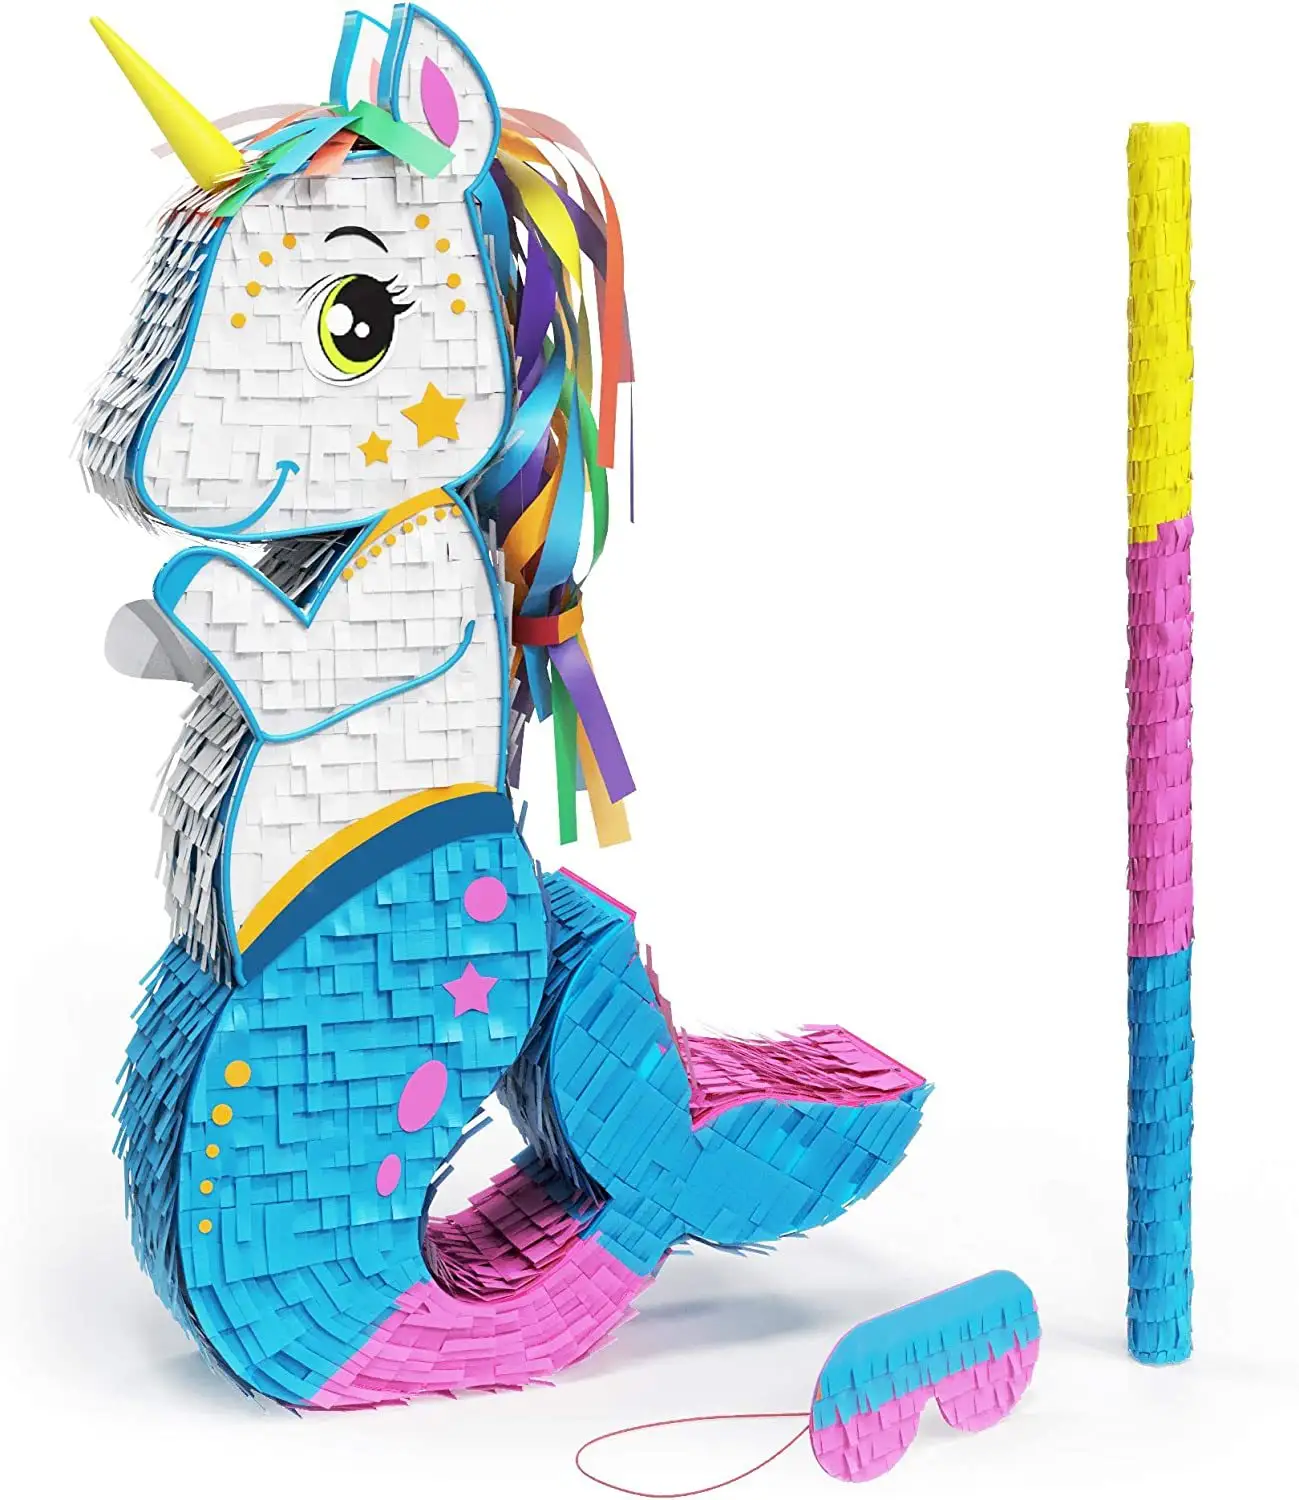 Mermaid Unicorn Pinata Bundle with a Blindfold and Bat HandMade Small Sized Pinata For Kids Carnival Birthday Party Decoration